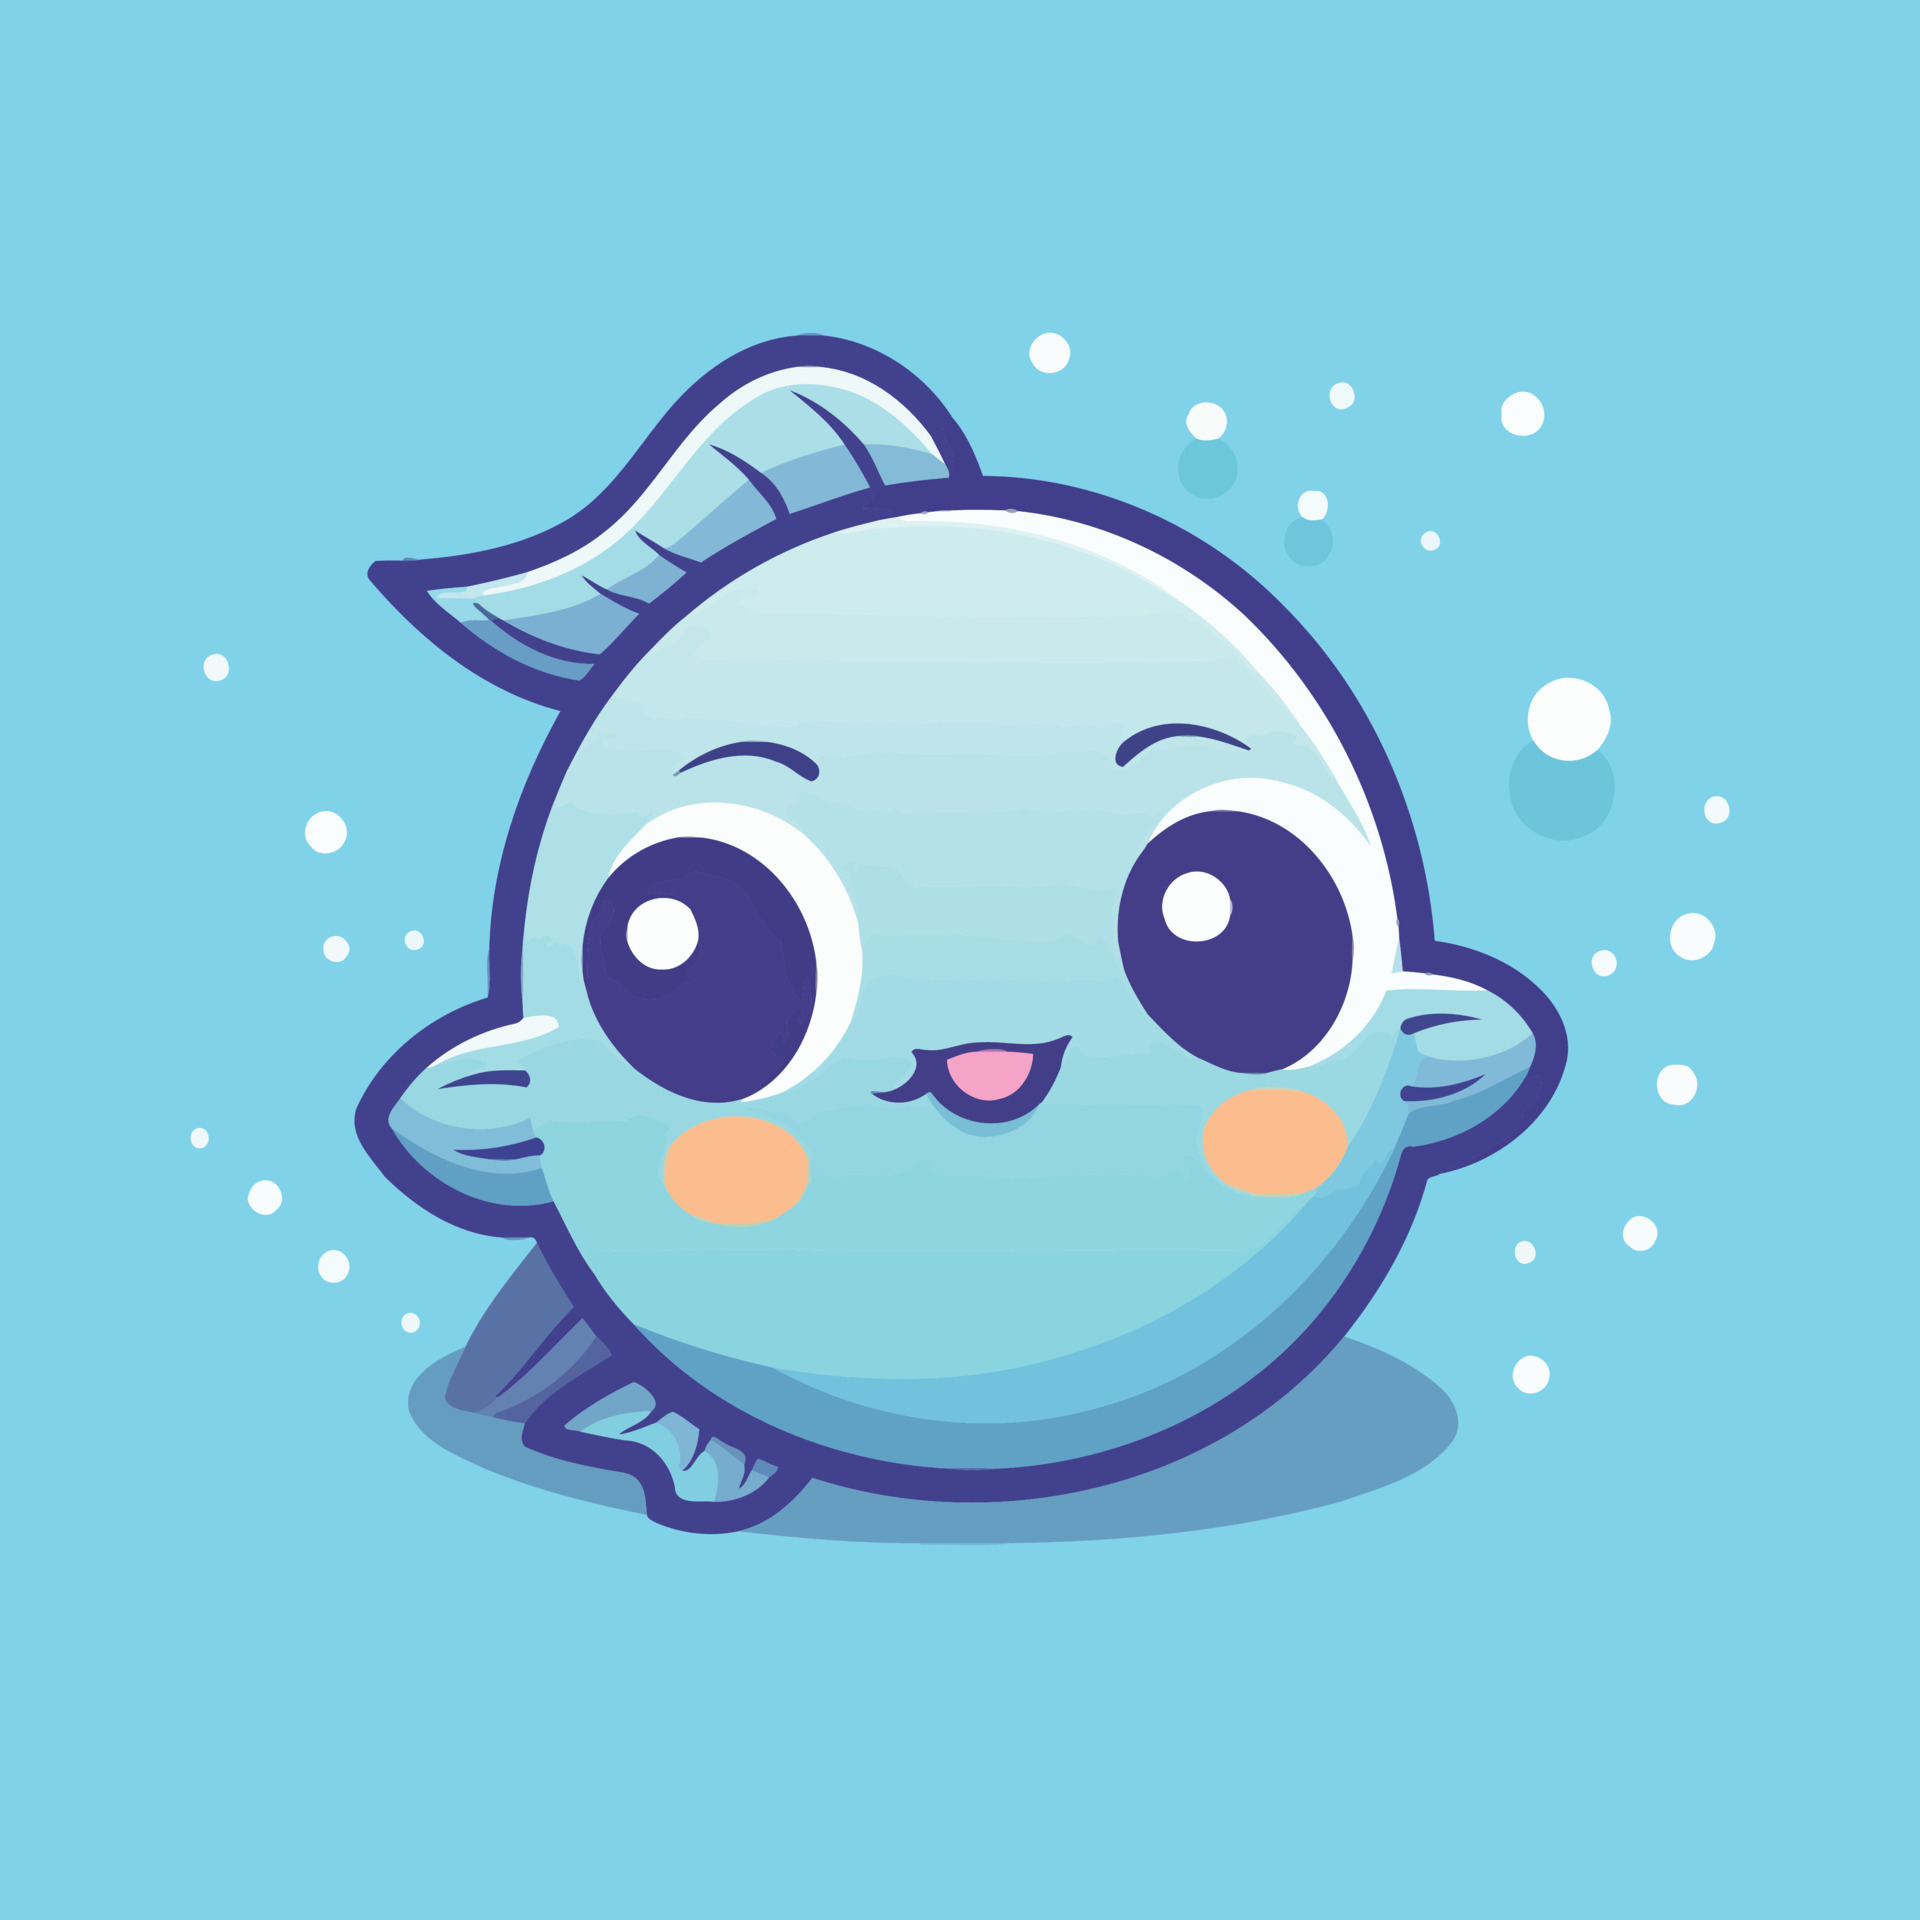 How to Draw a Cute Fish Easily | Free Printable Puzzle Games